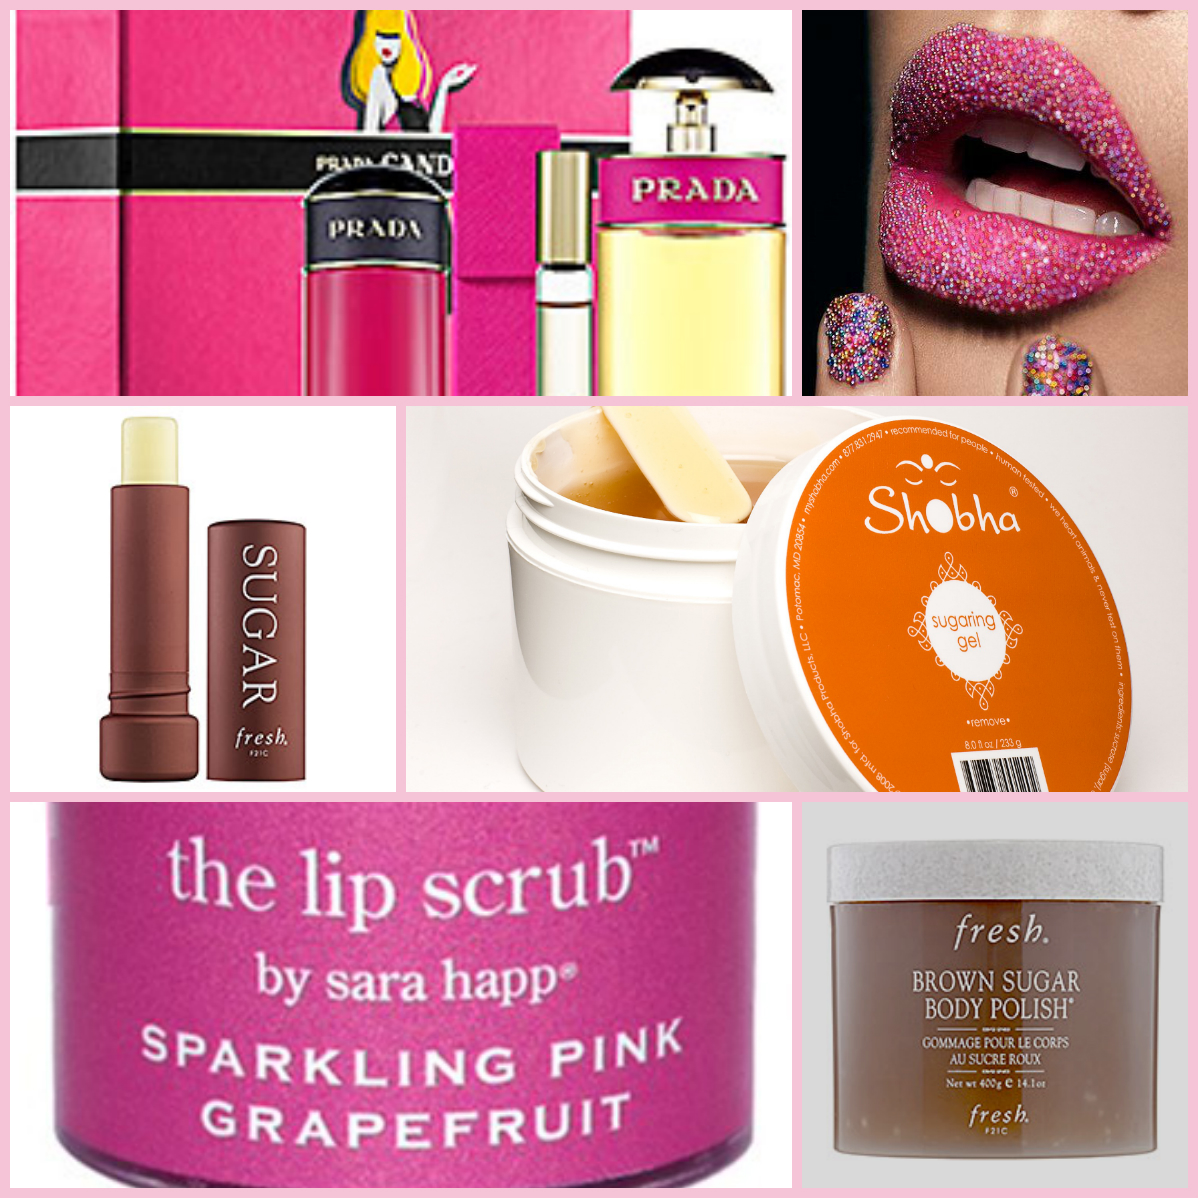 Sugar Rush: 5 Sugar-infused Beauty Products To Try Now